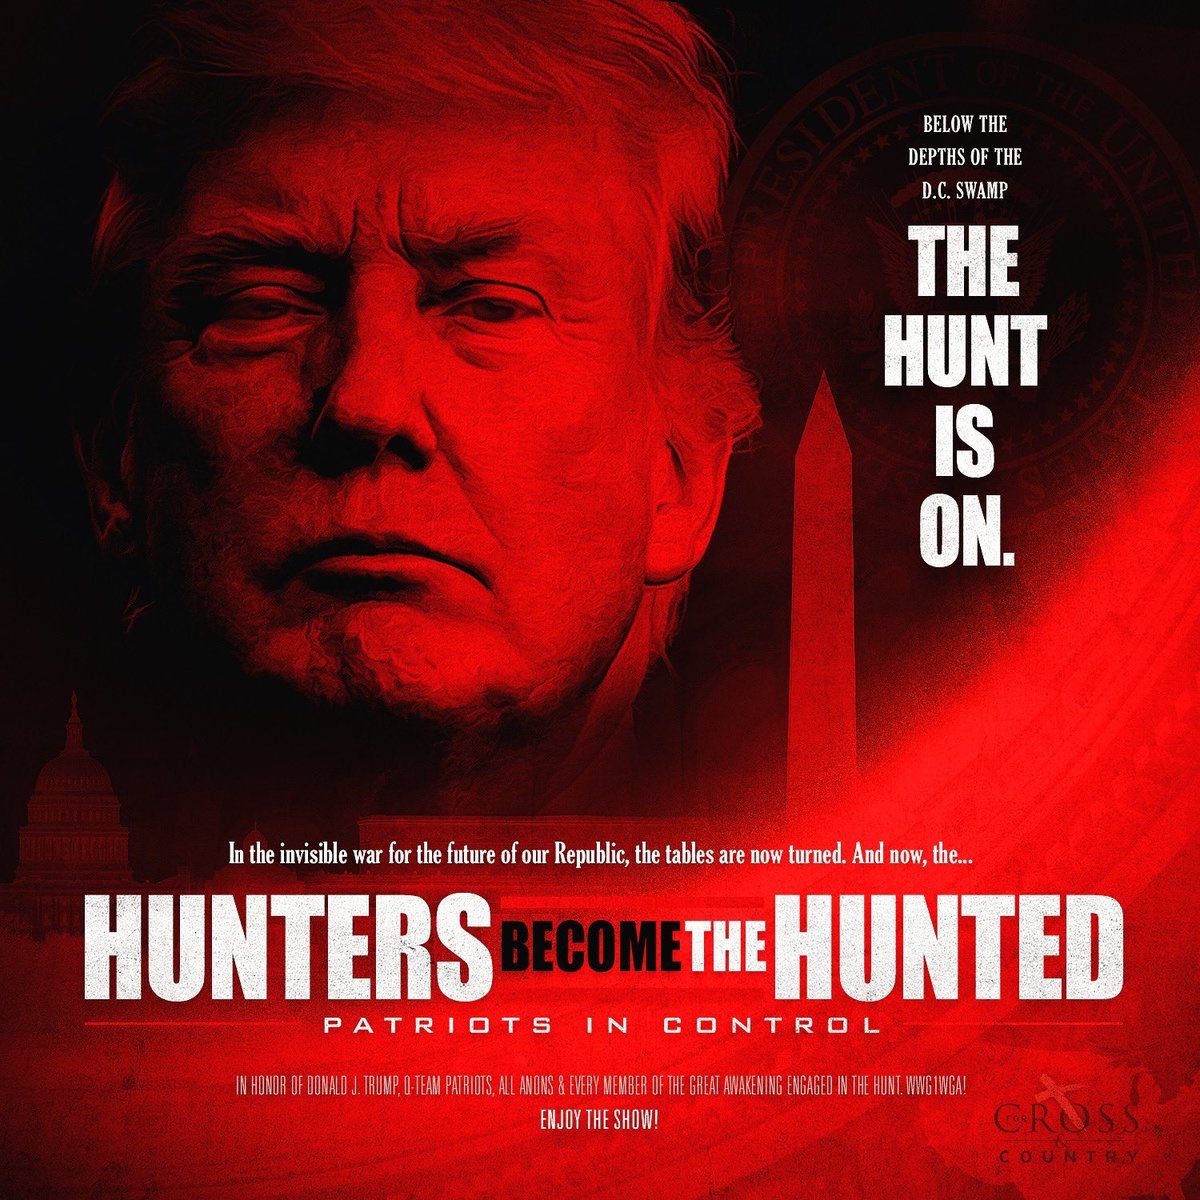 5/ The Hunt for Red October. The Hunters have become the Hunted. Six o’clock can be a dangerous hour.